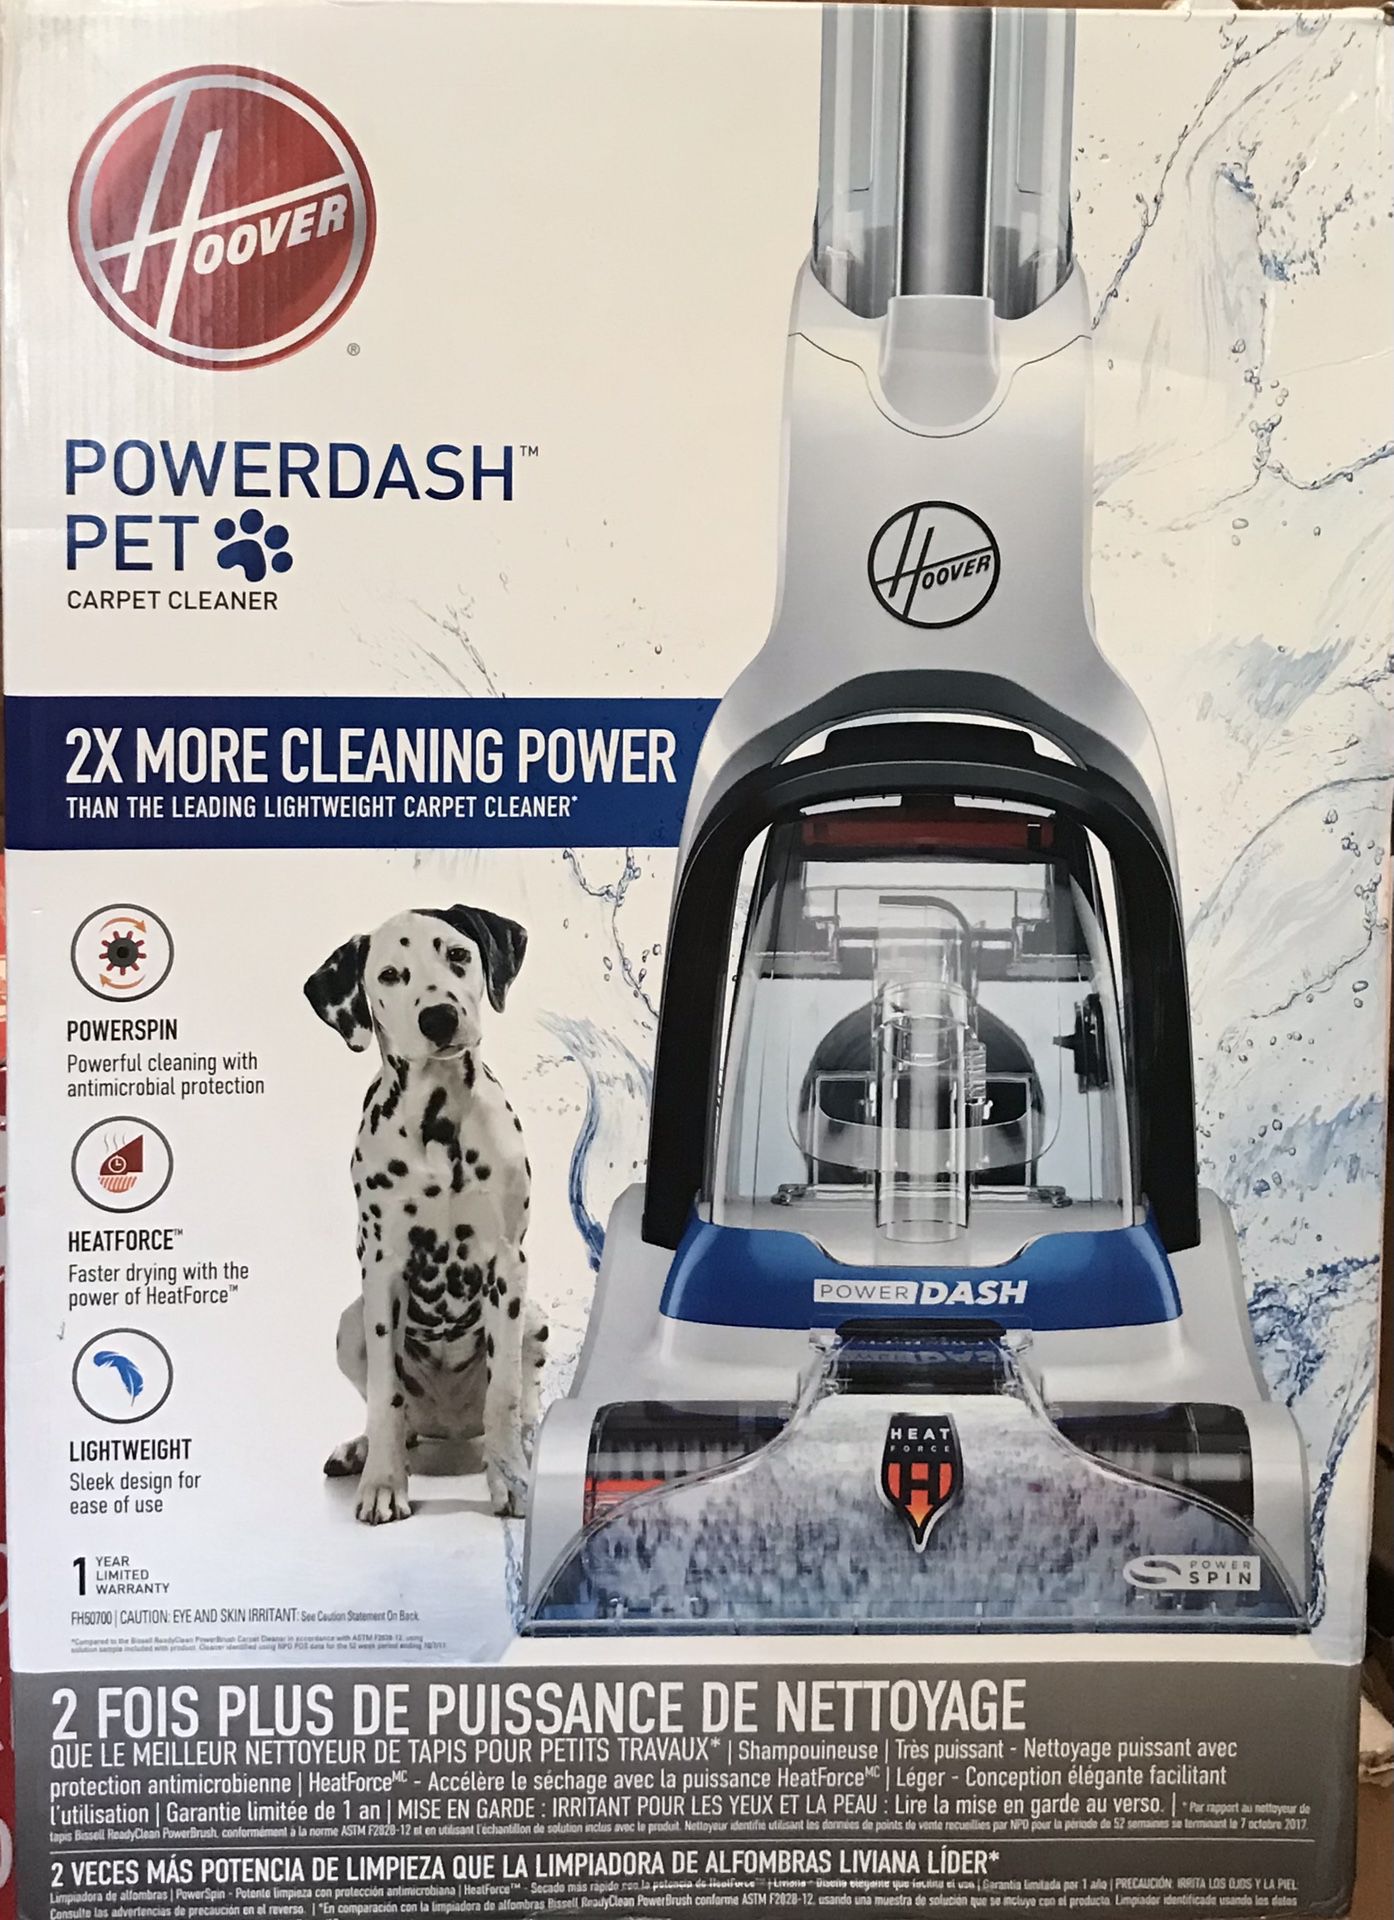 NEW! Hoover PowerDash Pet Compact Carpet Cleaner, Lightweight, FH50700, Blue